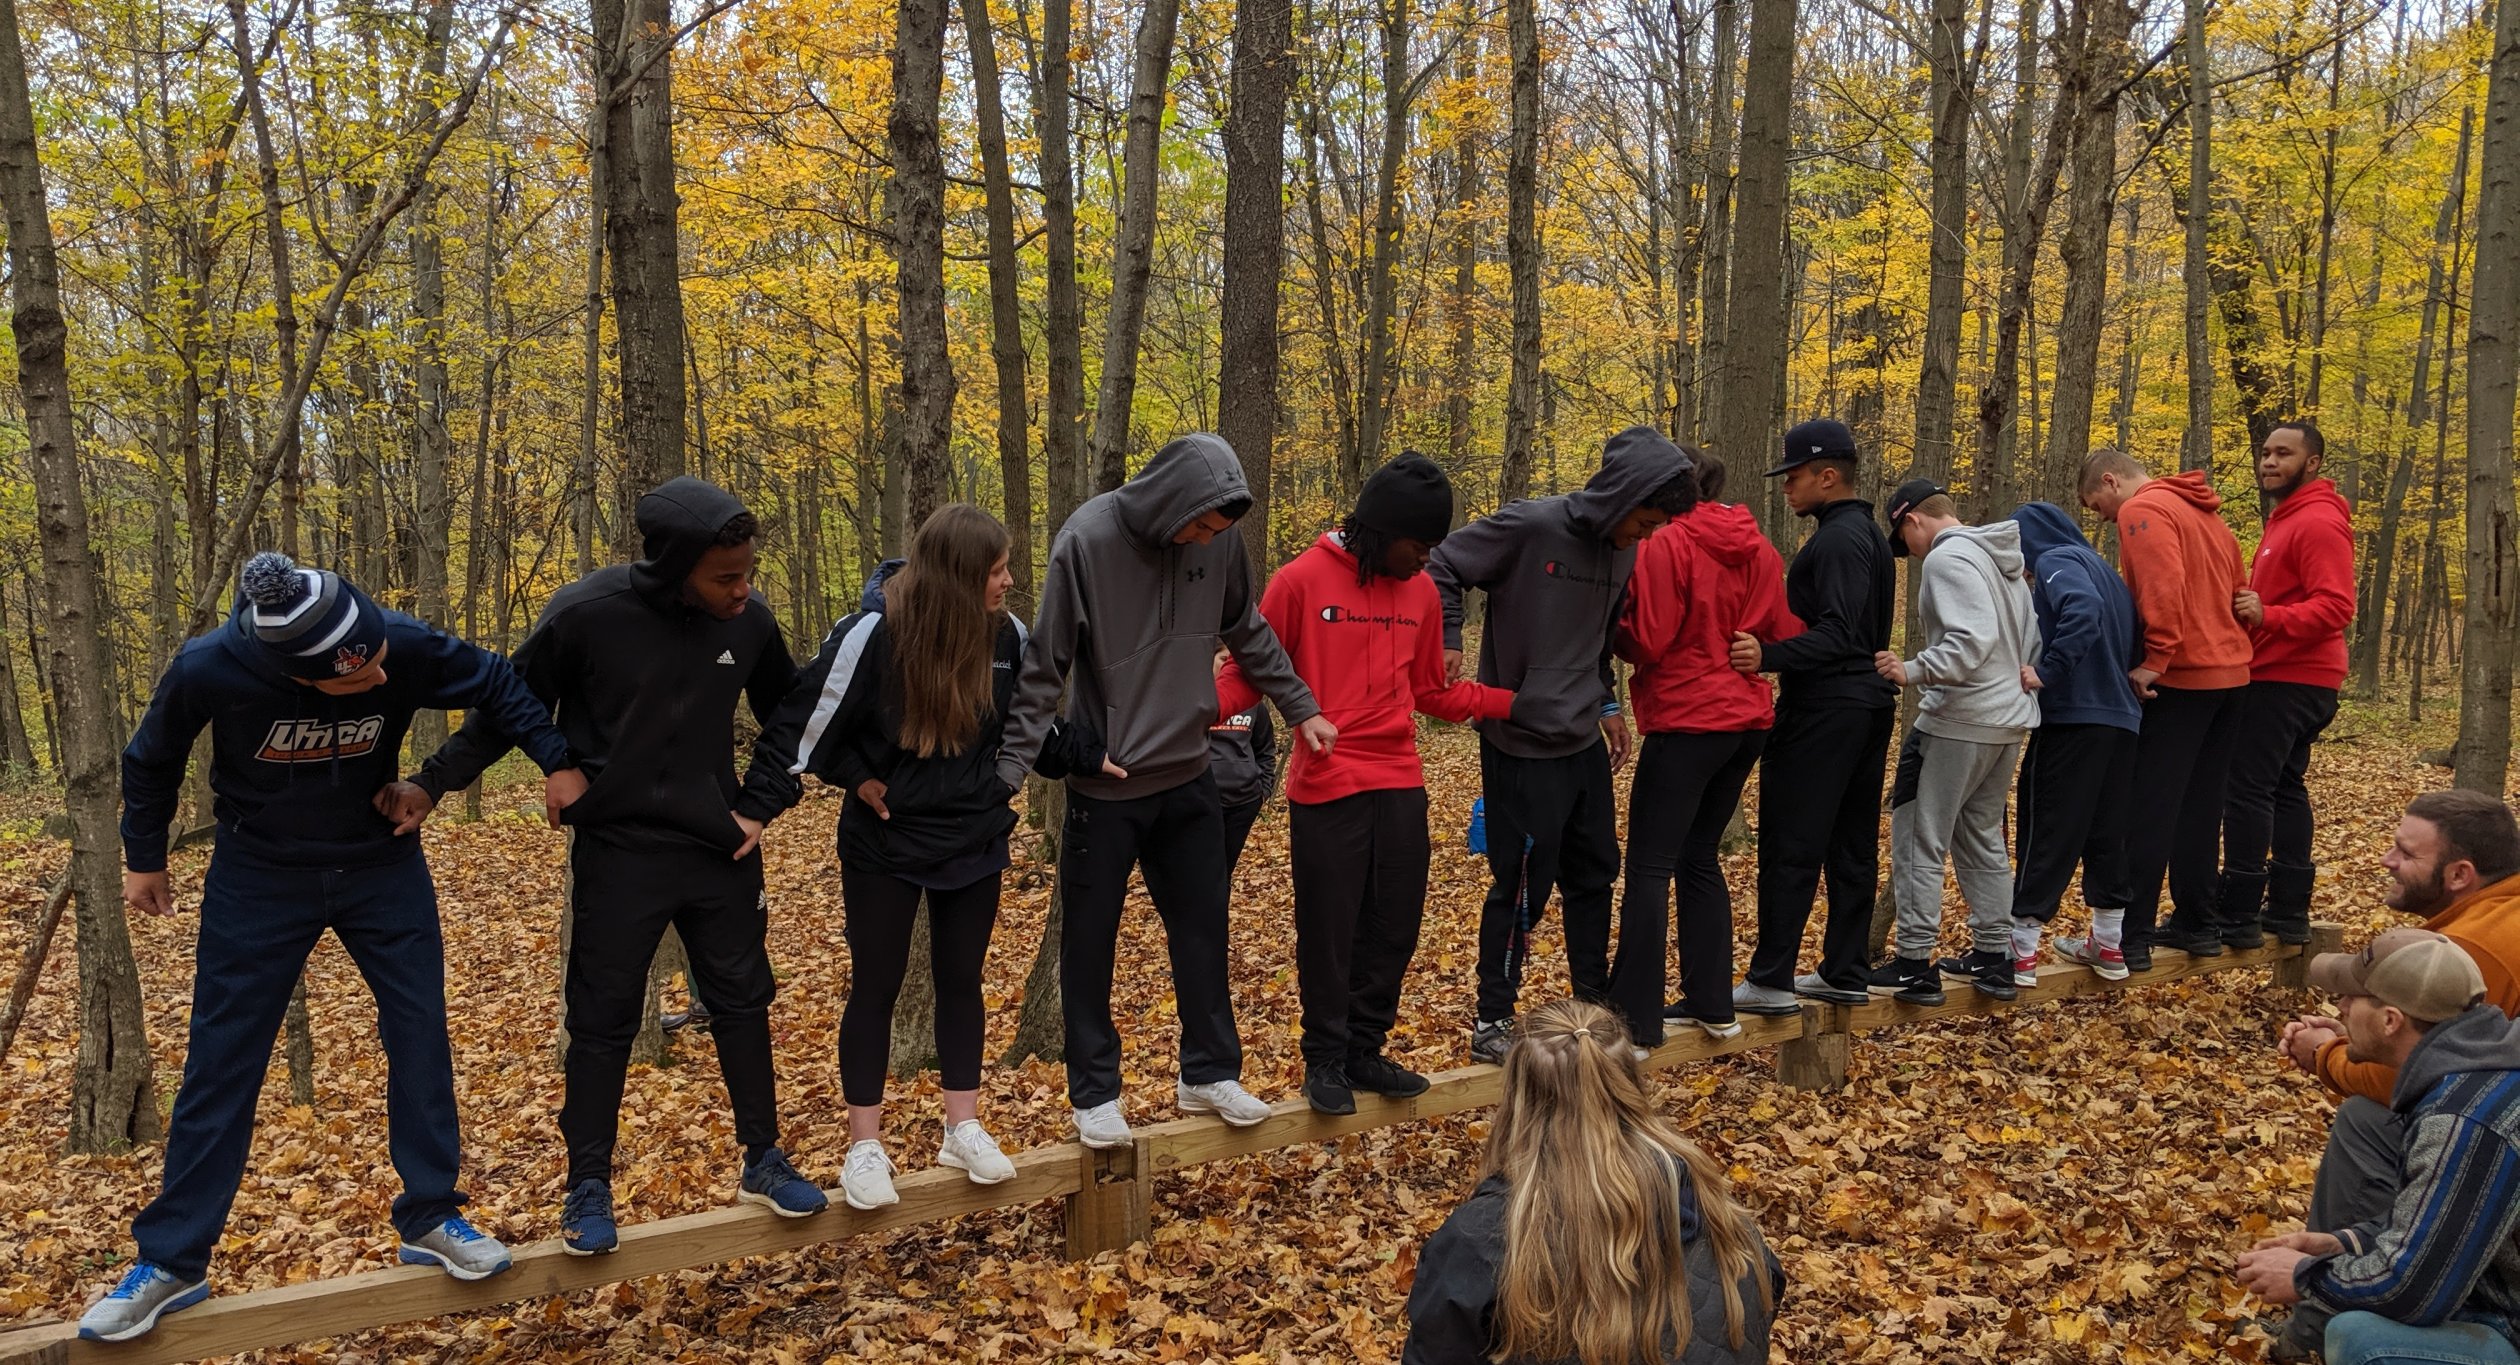 Students in the woods stand on a log holding hands.